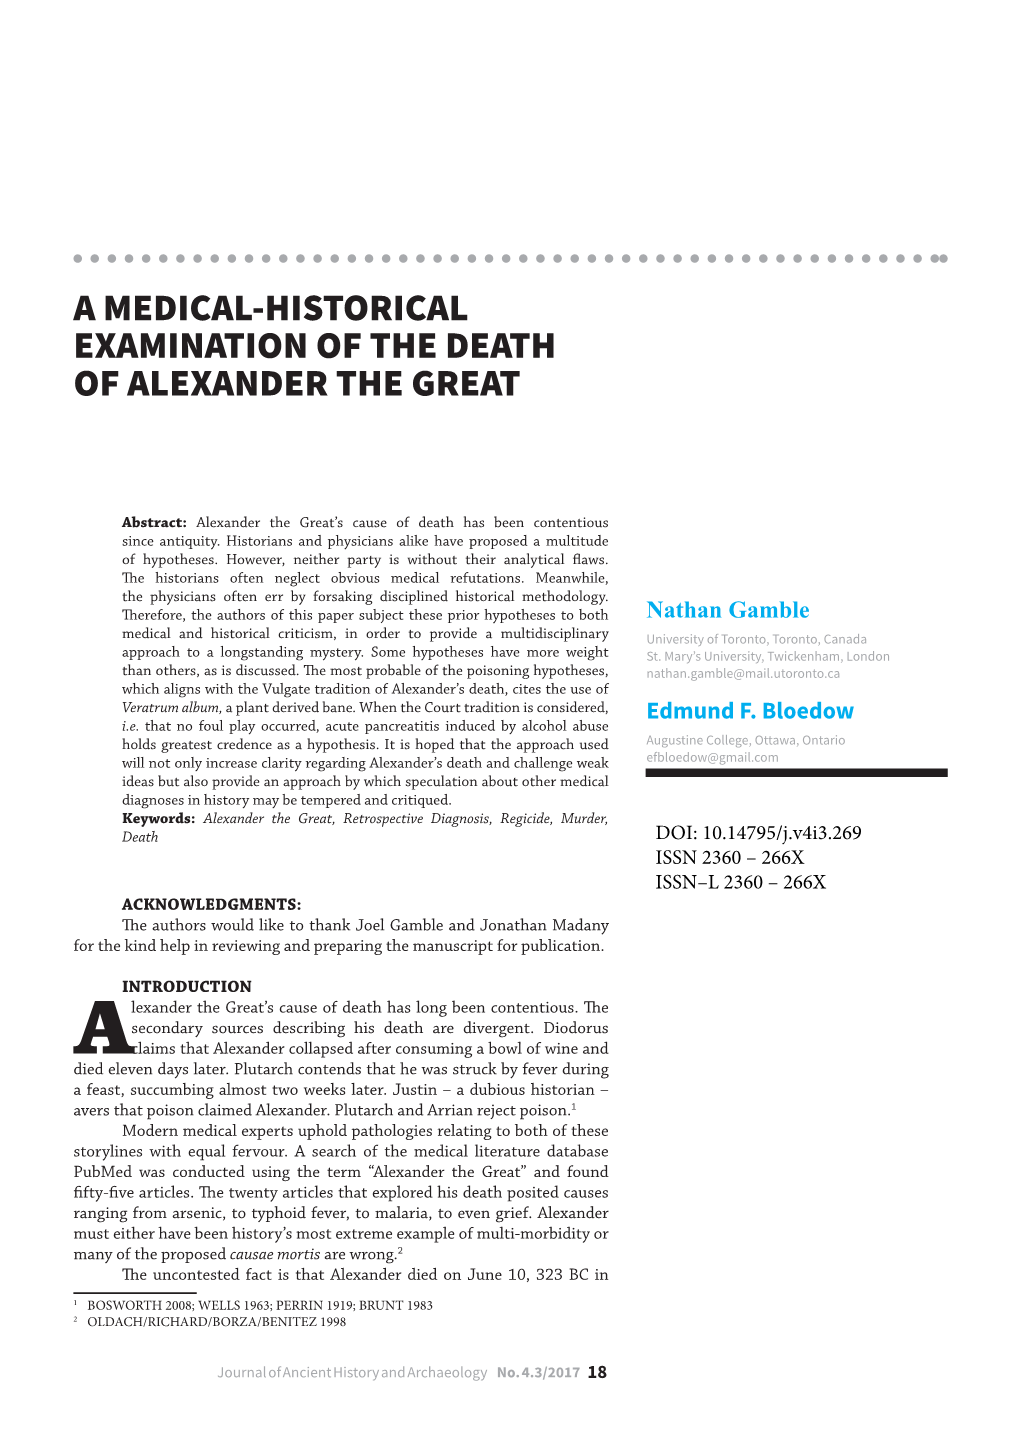 A Medical-Historical Examination of the Death of Alexander the Great